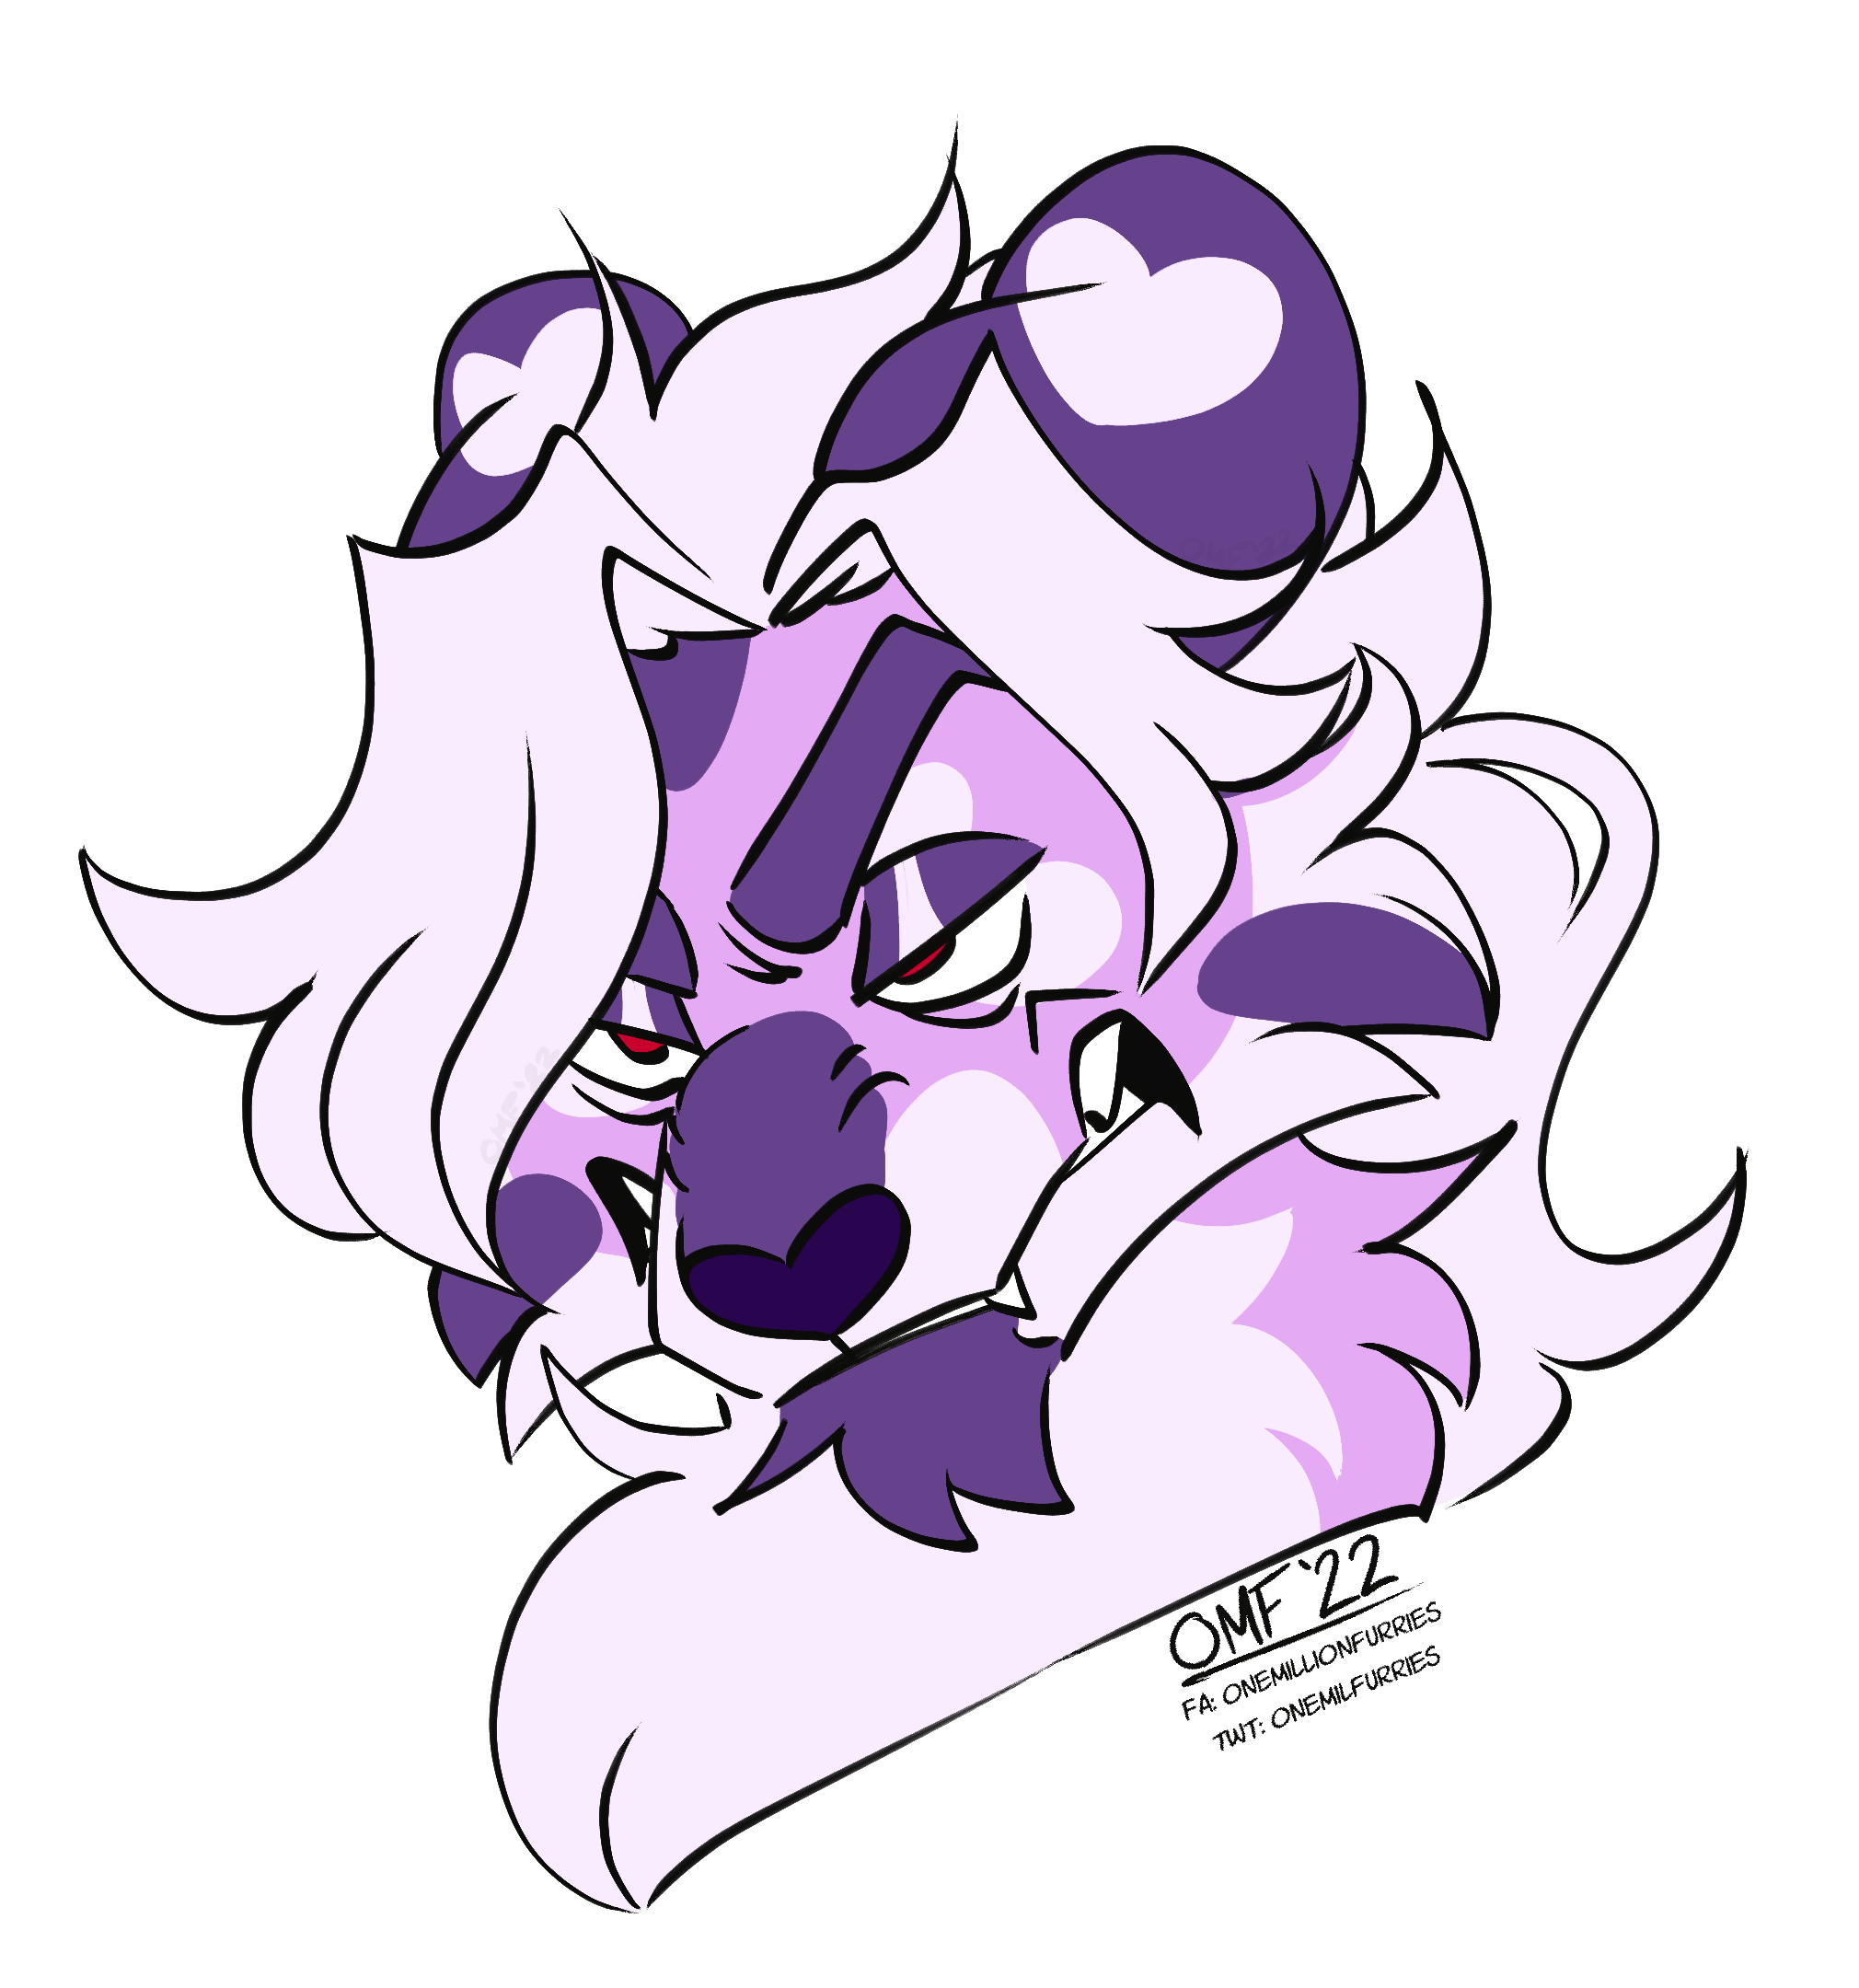 A headshot drawing of Dr. Luvstruck, the webmaster's fursona, snarling at a nearly head-on angle. He is a purple tiger-cat with flowy white hair and white heart markings on his dark purple ears.